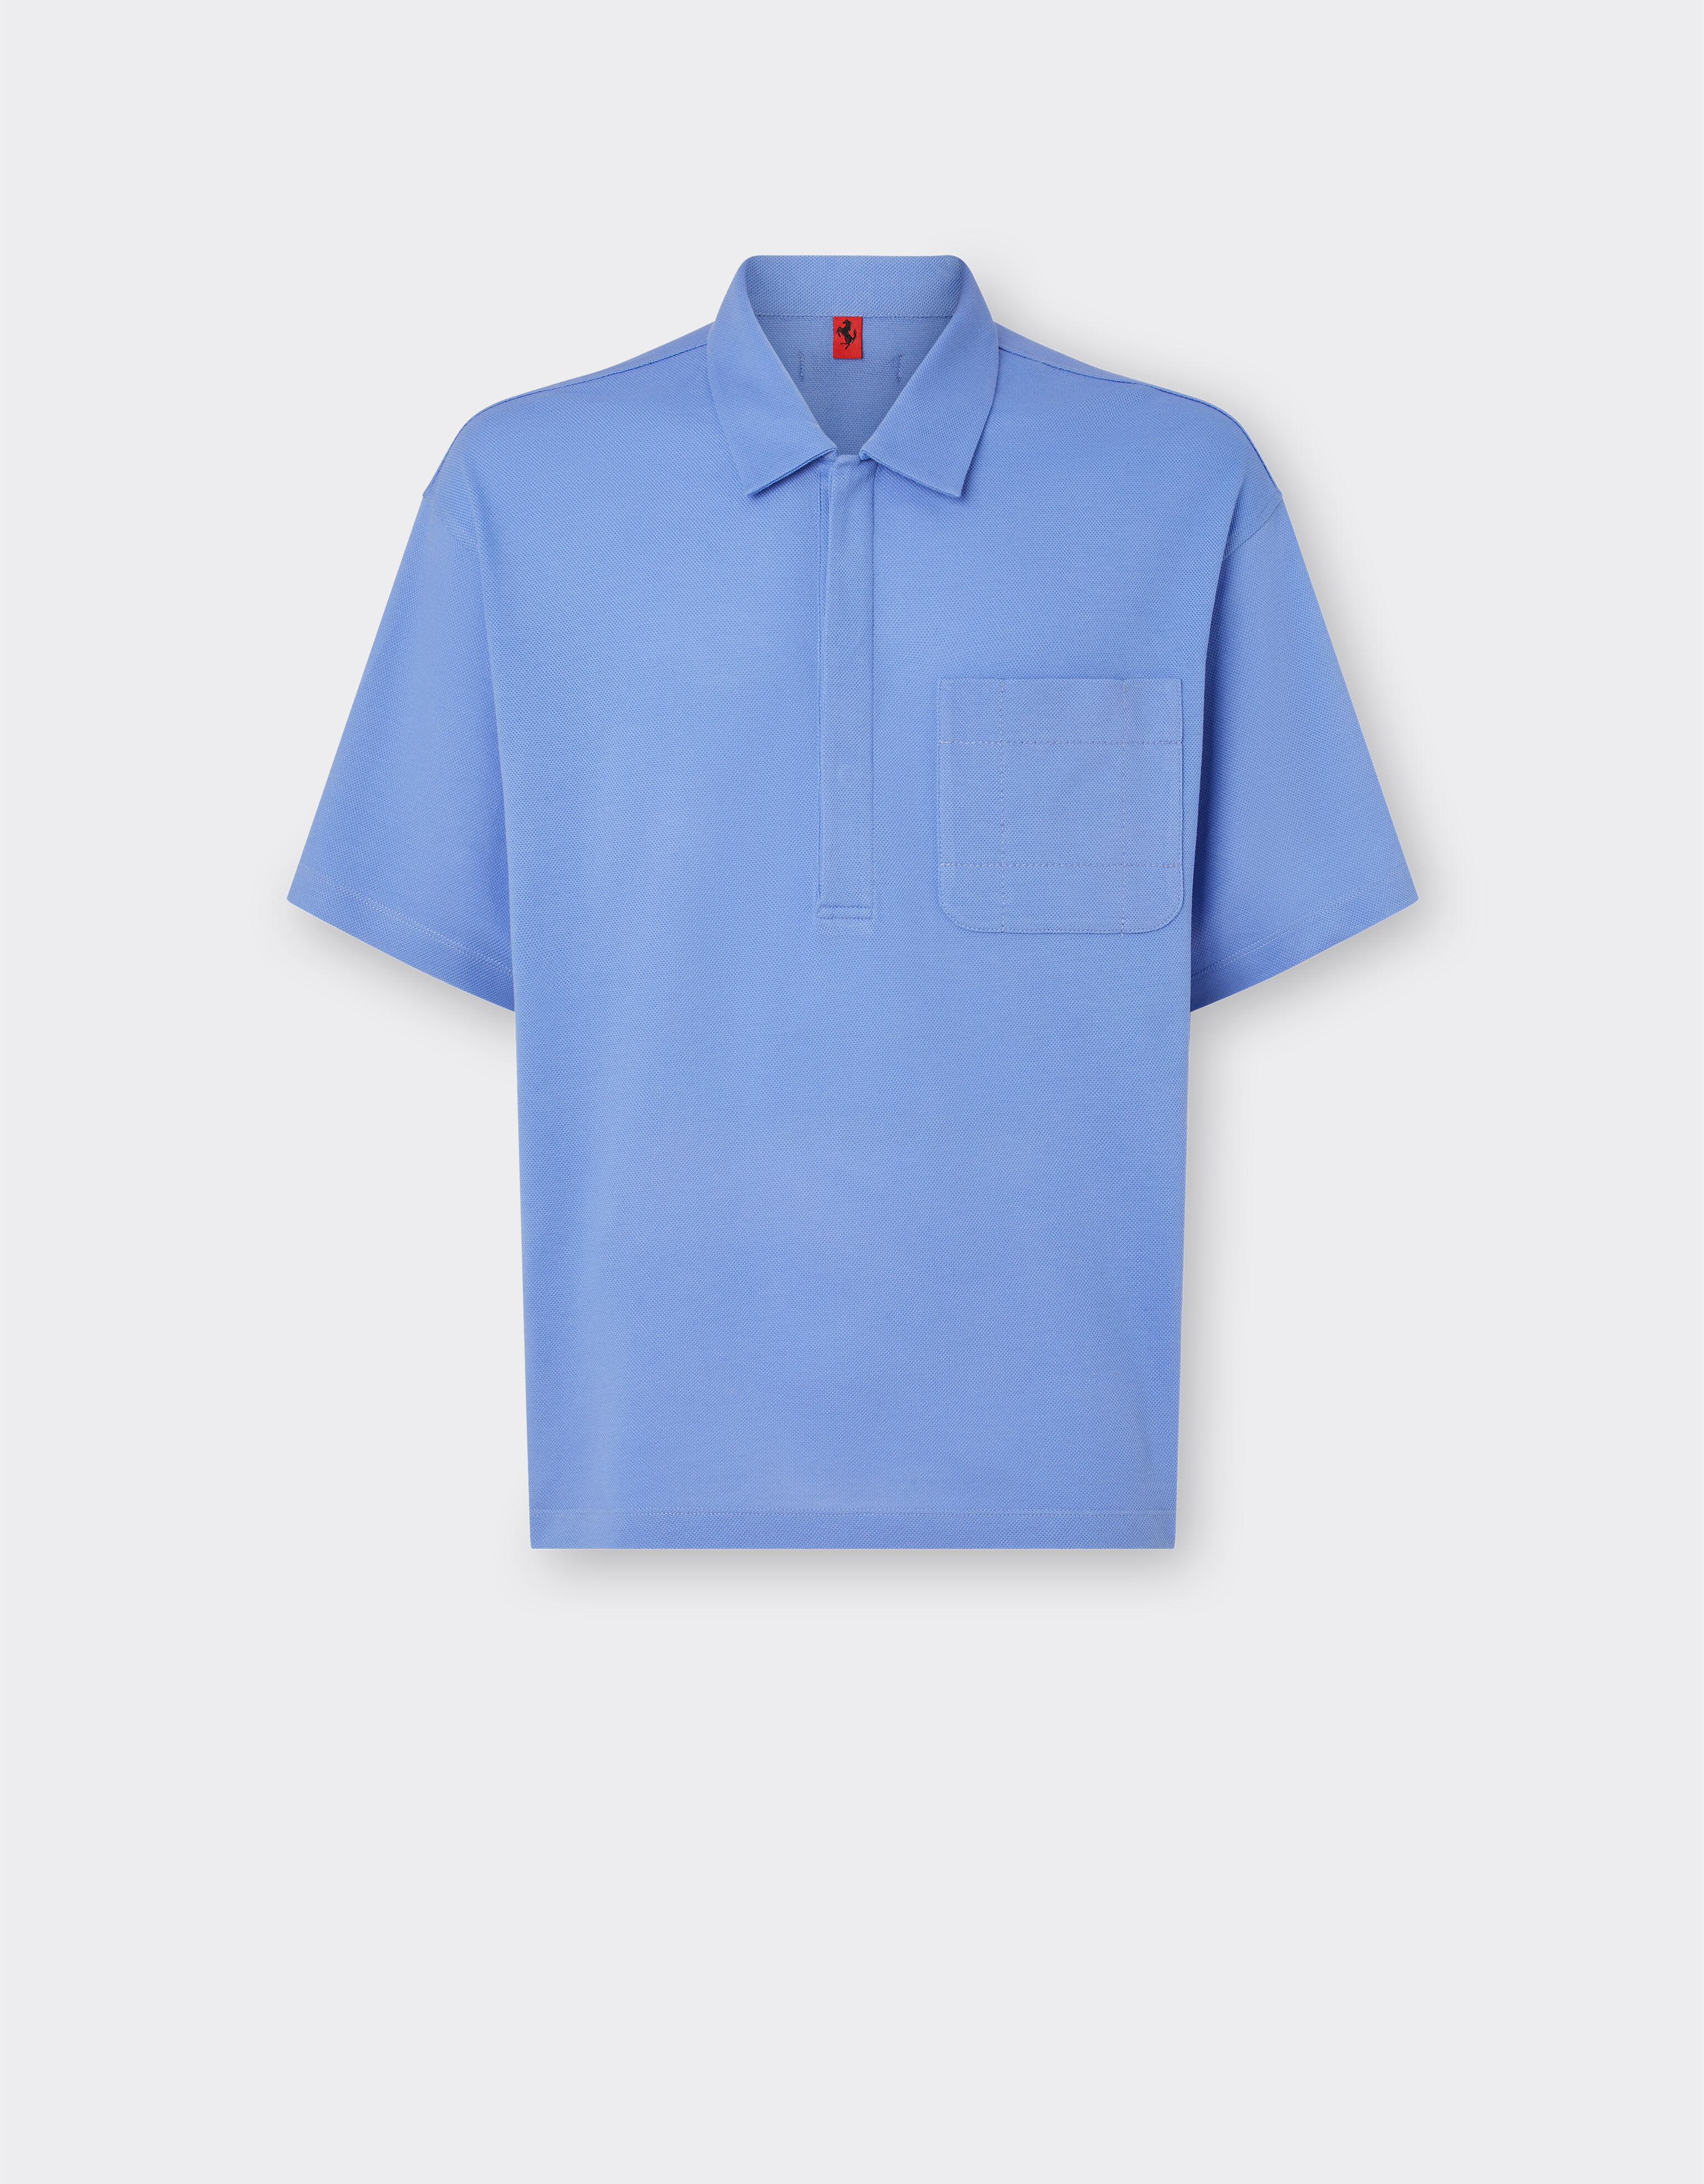 ${brand} Cotton polo shirt with 7X7 check pattern ${colorDescription} ${masterID}